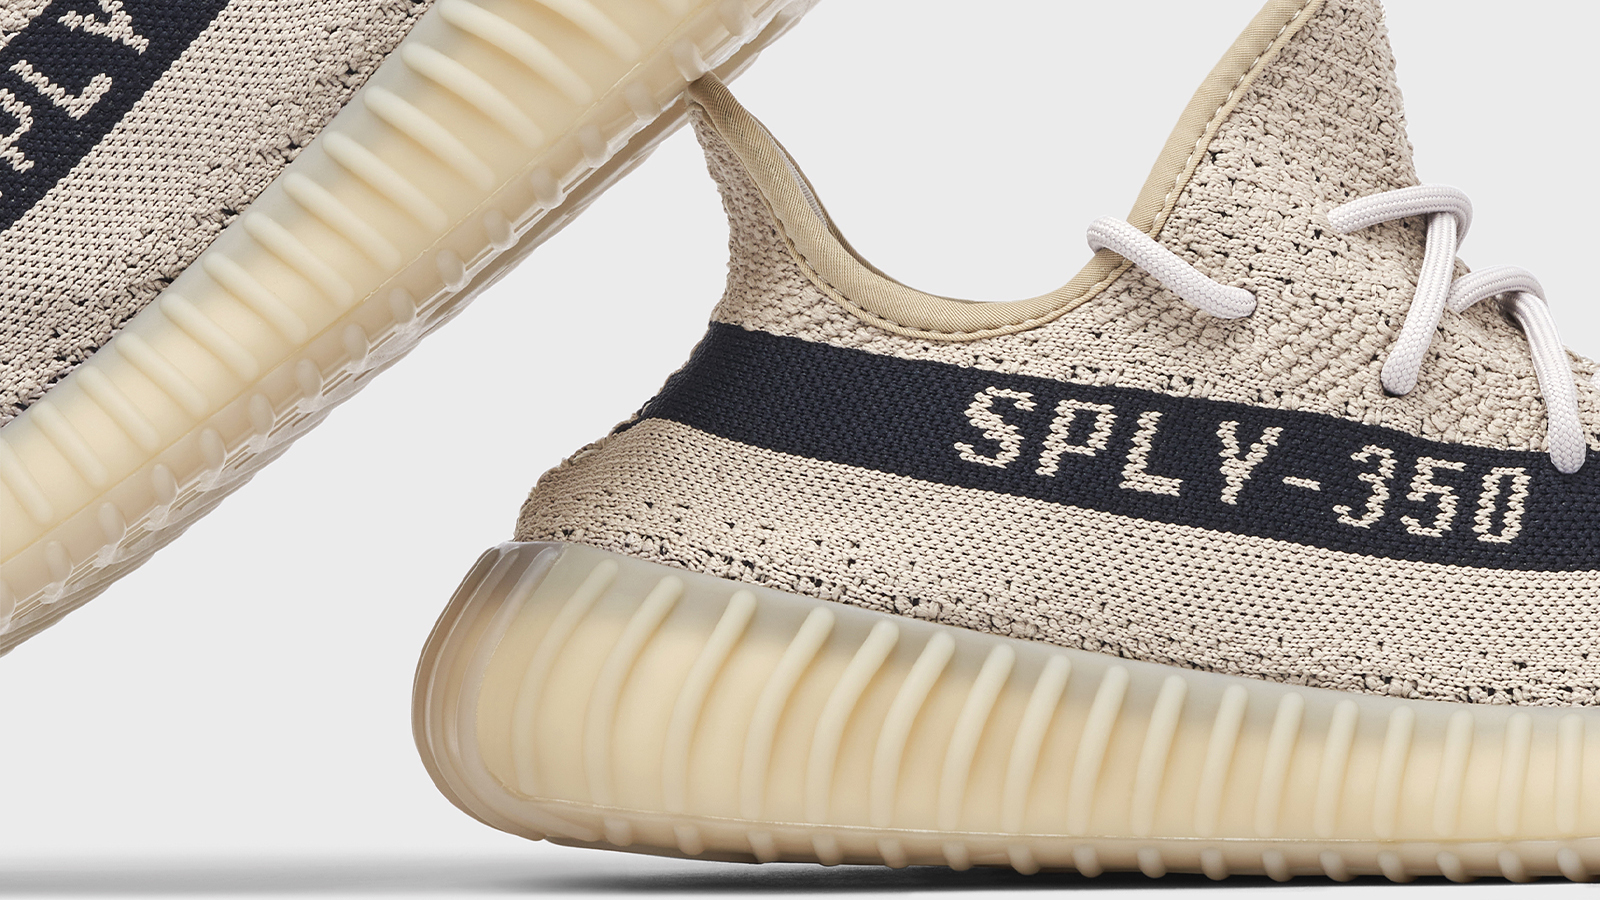 How Do Yeezy Boost 350s Fit? The Ultimate Yeezy Boost 350 Size Guide